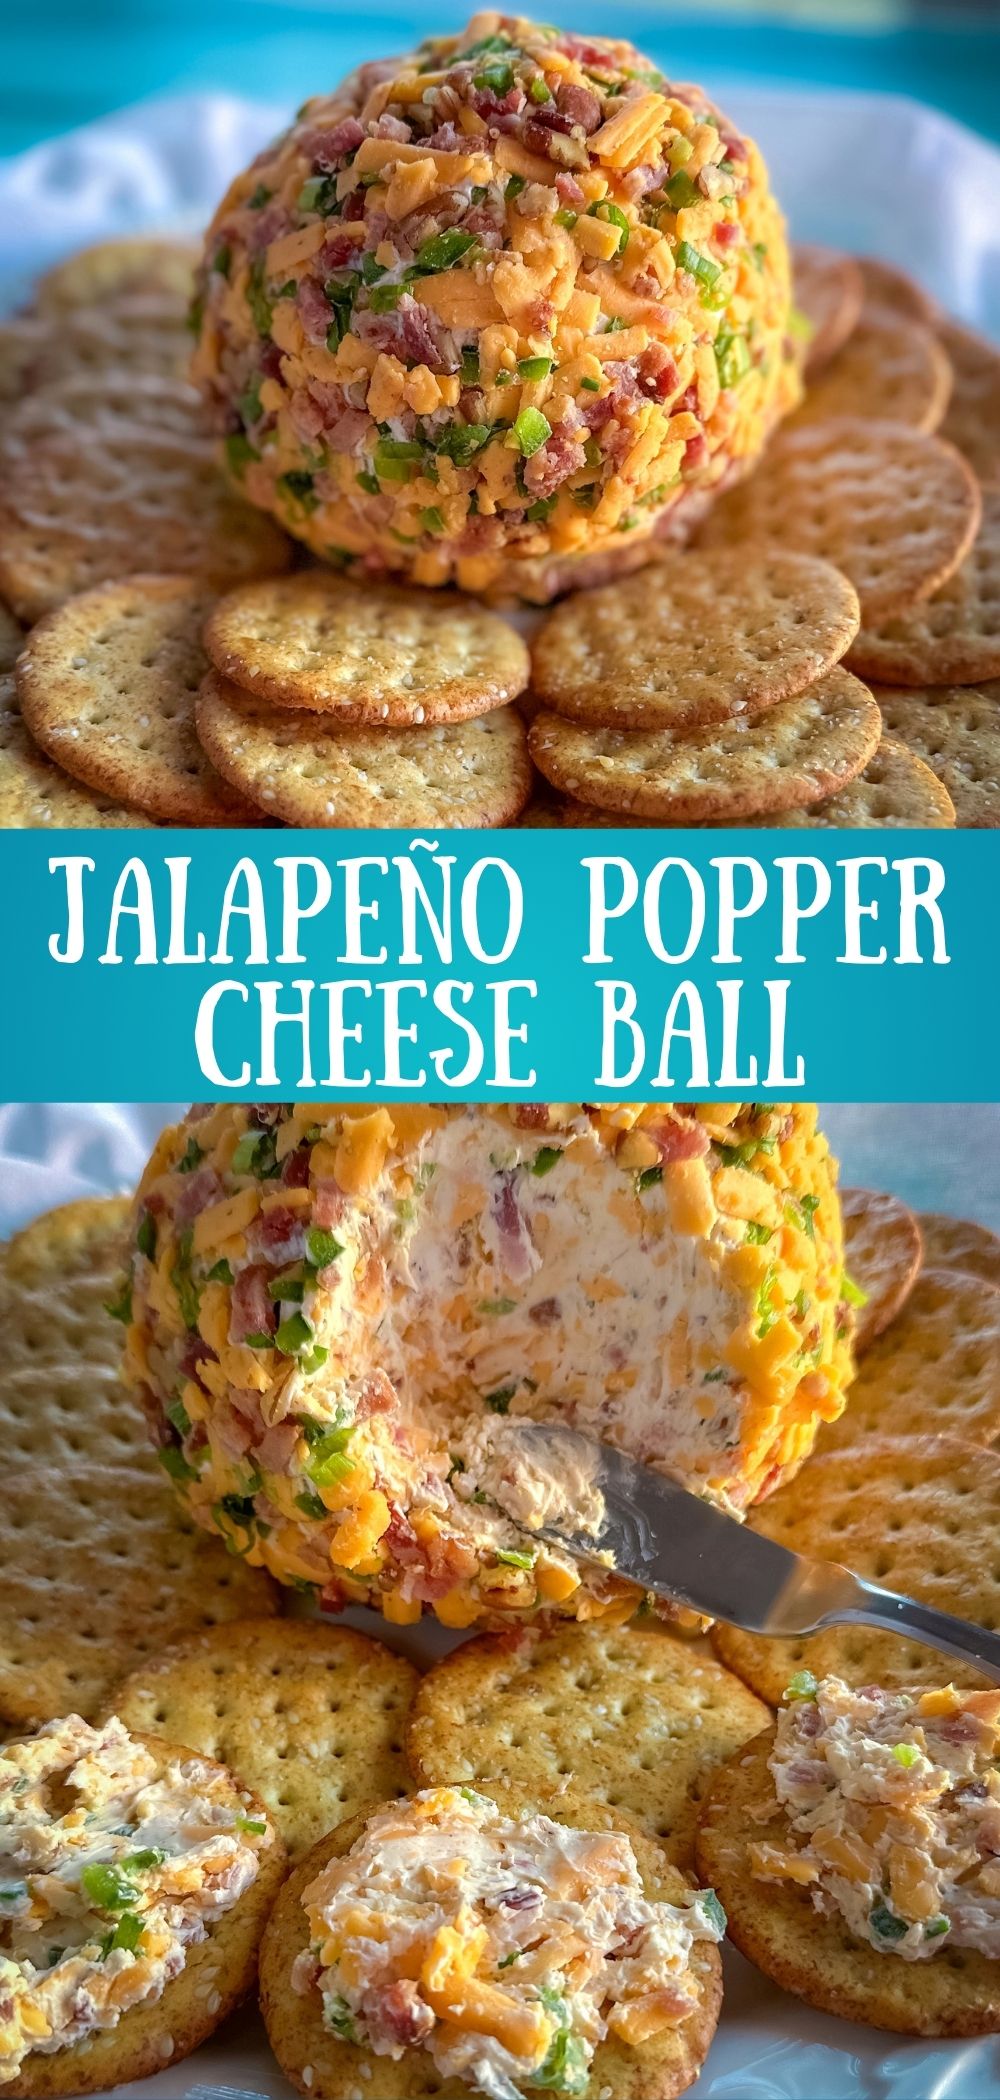 Jalapeño Popper Cheese Ball | Donuts2Crumpets